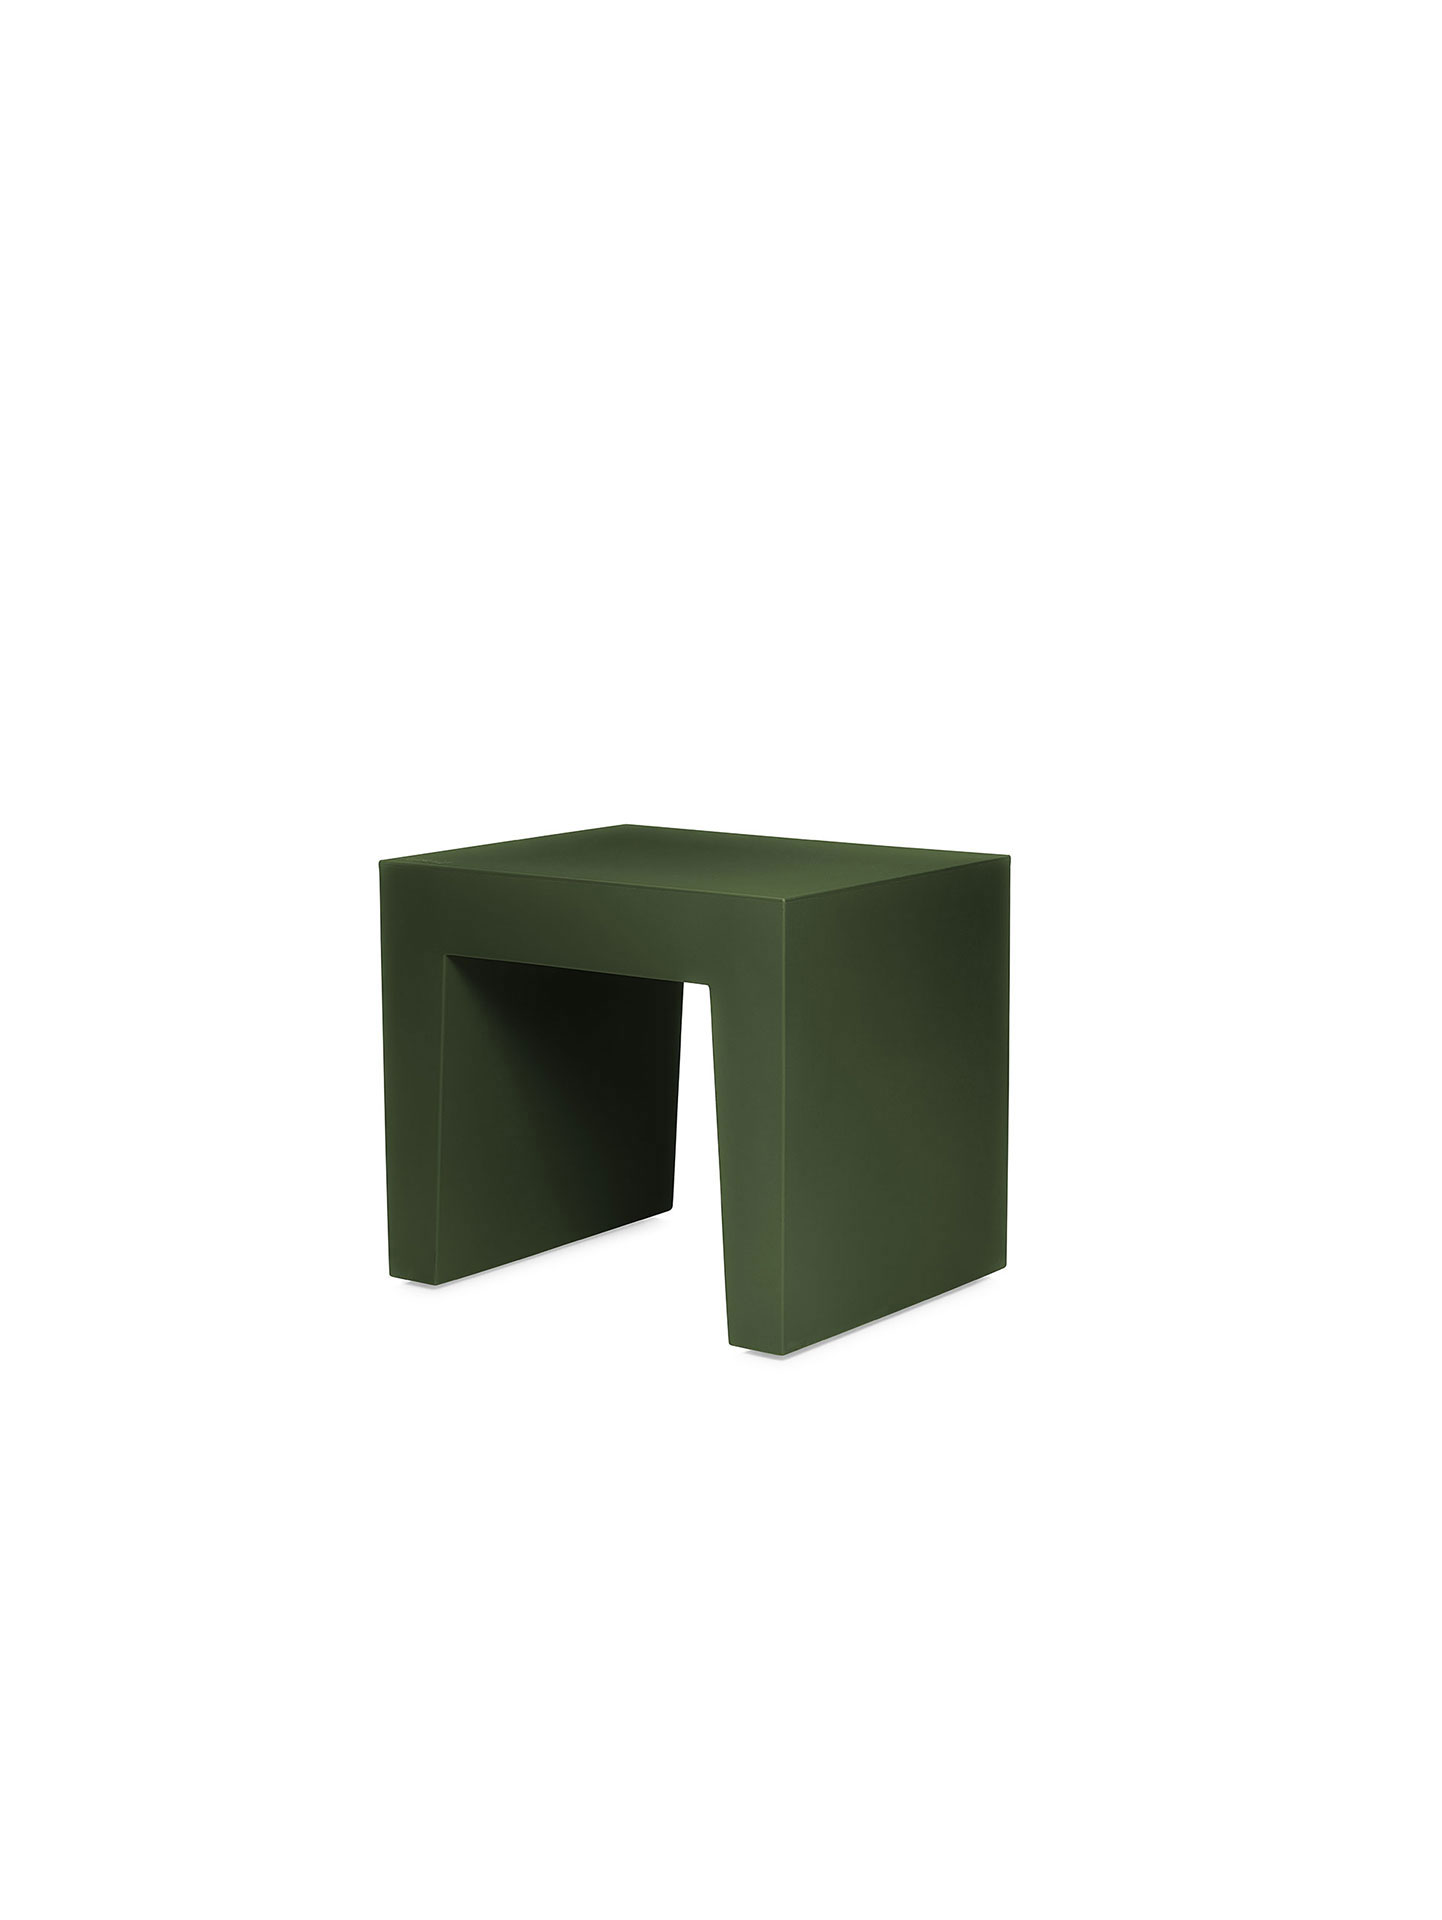 Concrete Seat : Recycled Forest Green